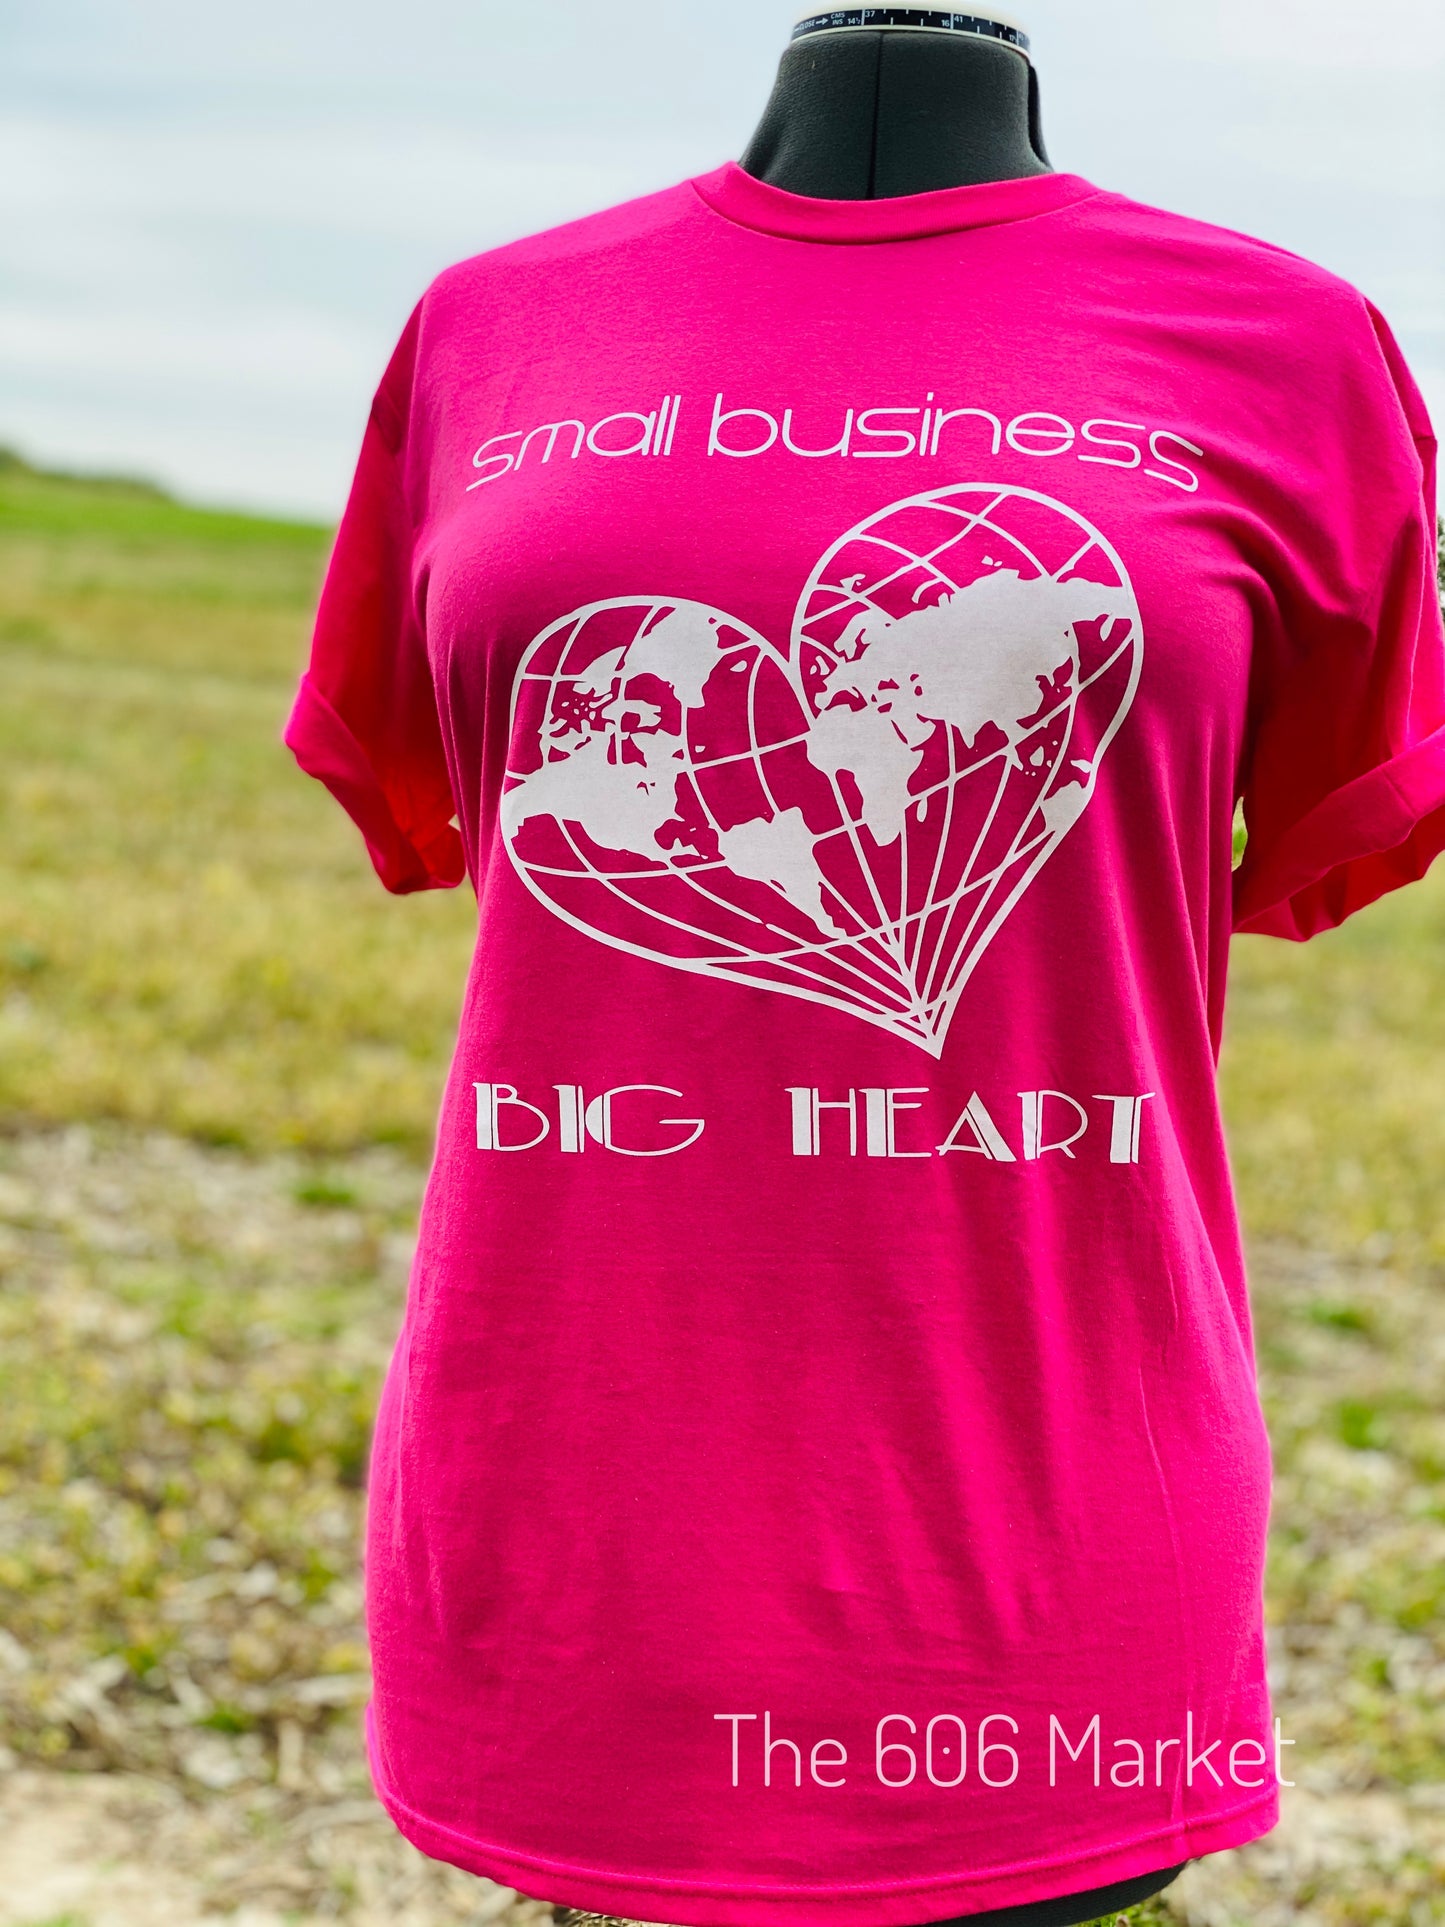 hot pink t-shirt with small business big heart on front  and a heart shape globe printed on front of t-shirt